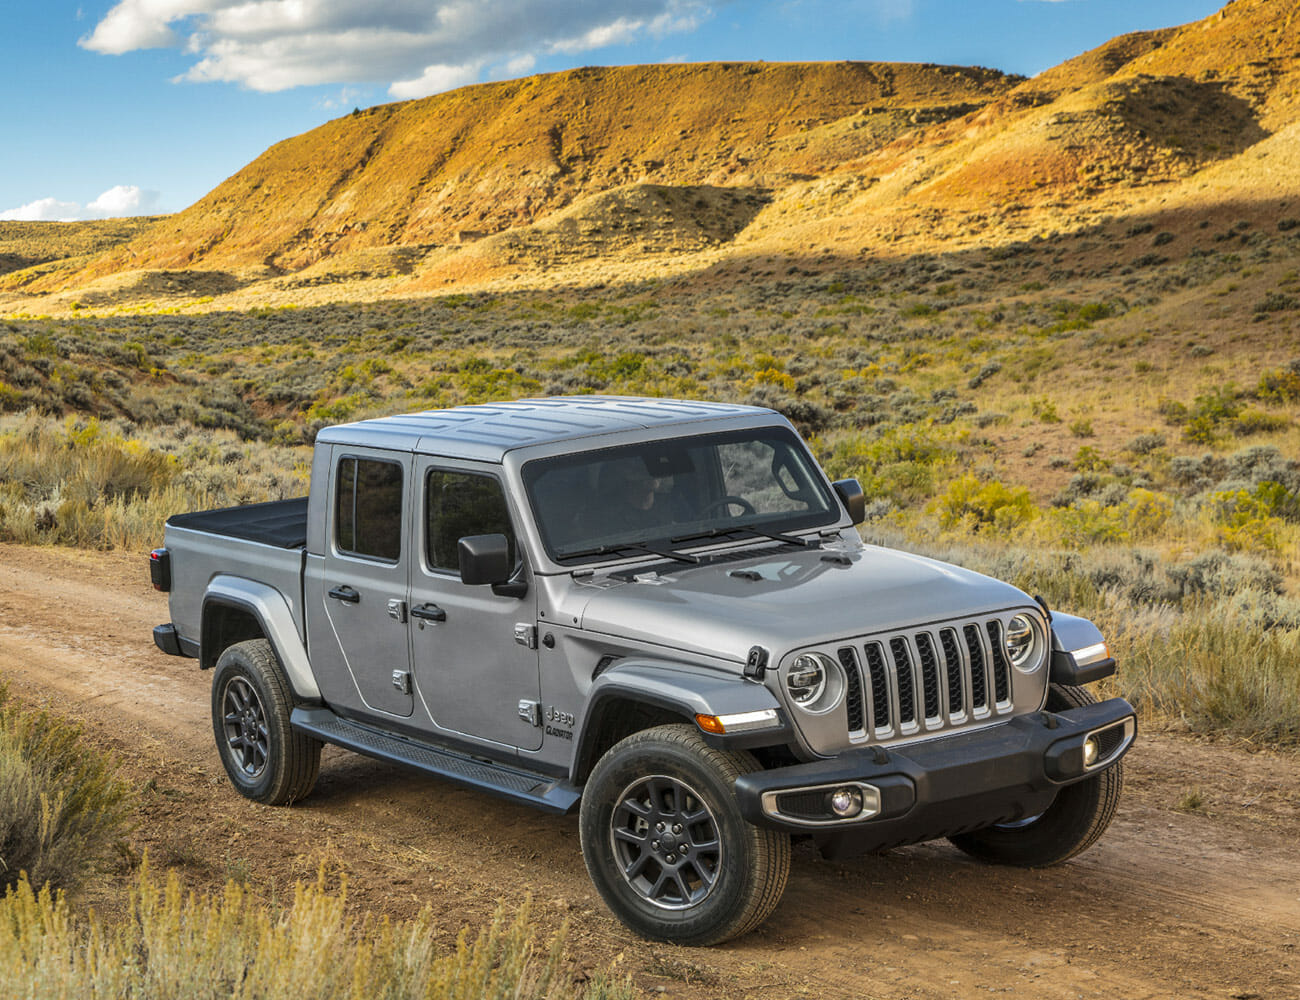 The Complete Jeep Buying Guide: Every Model, Explained